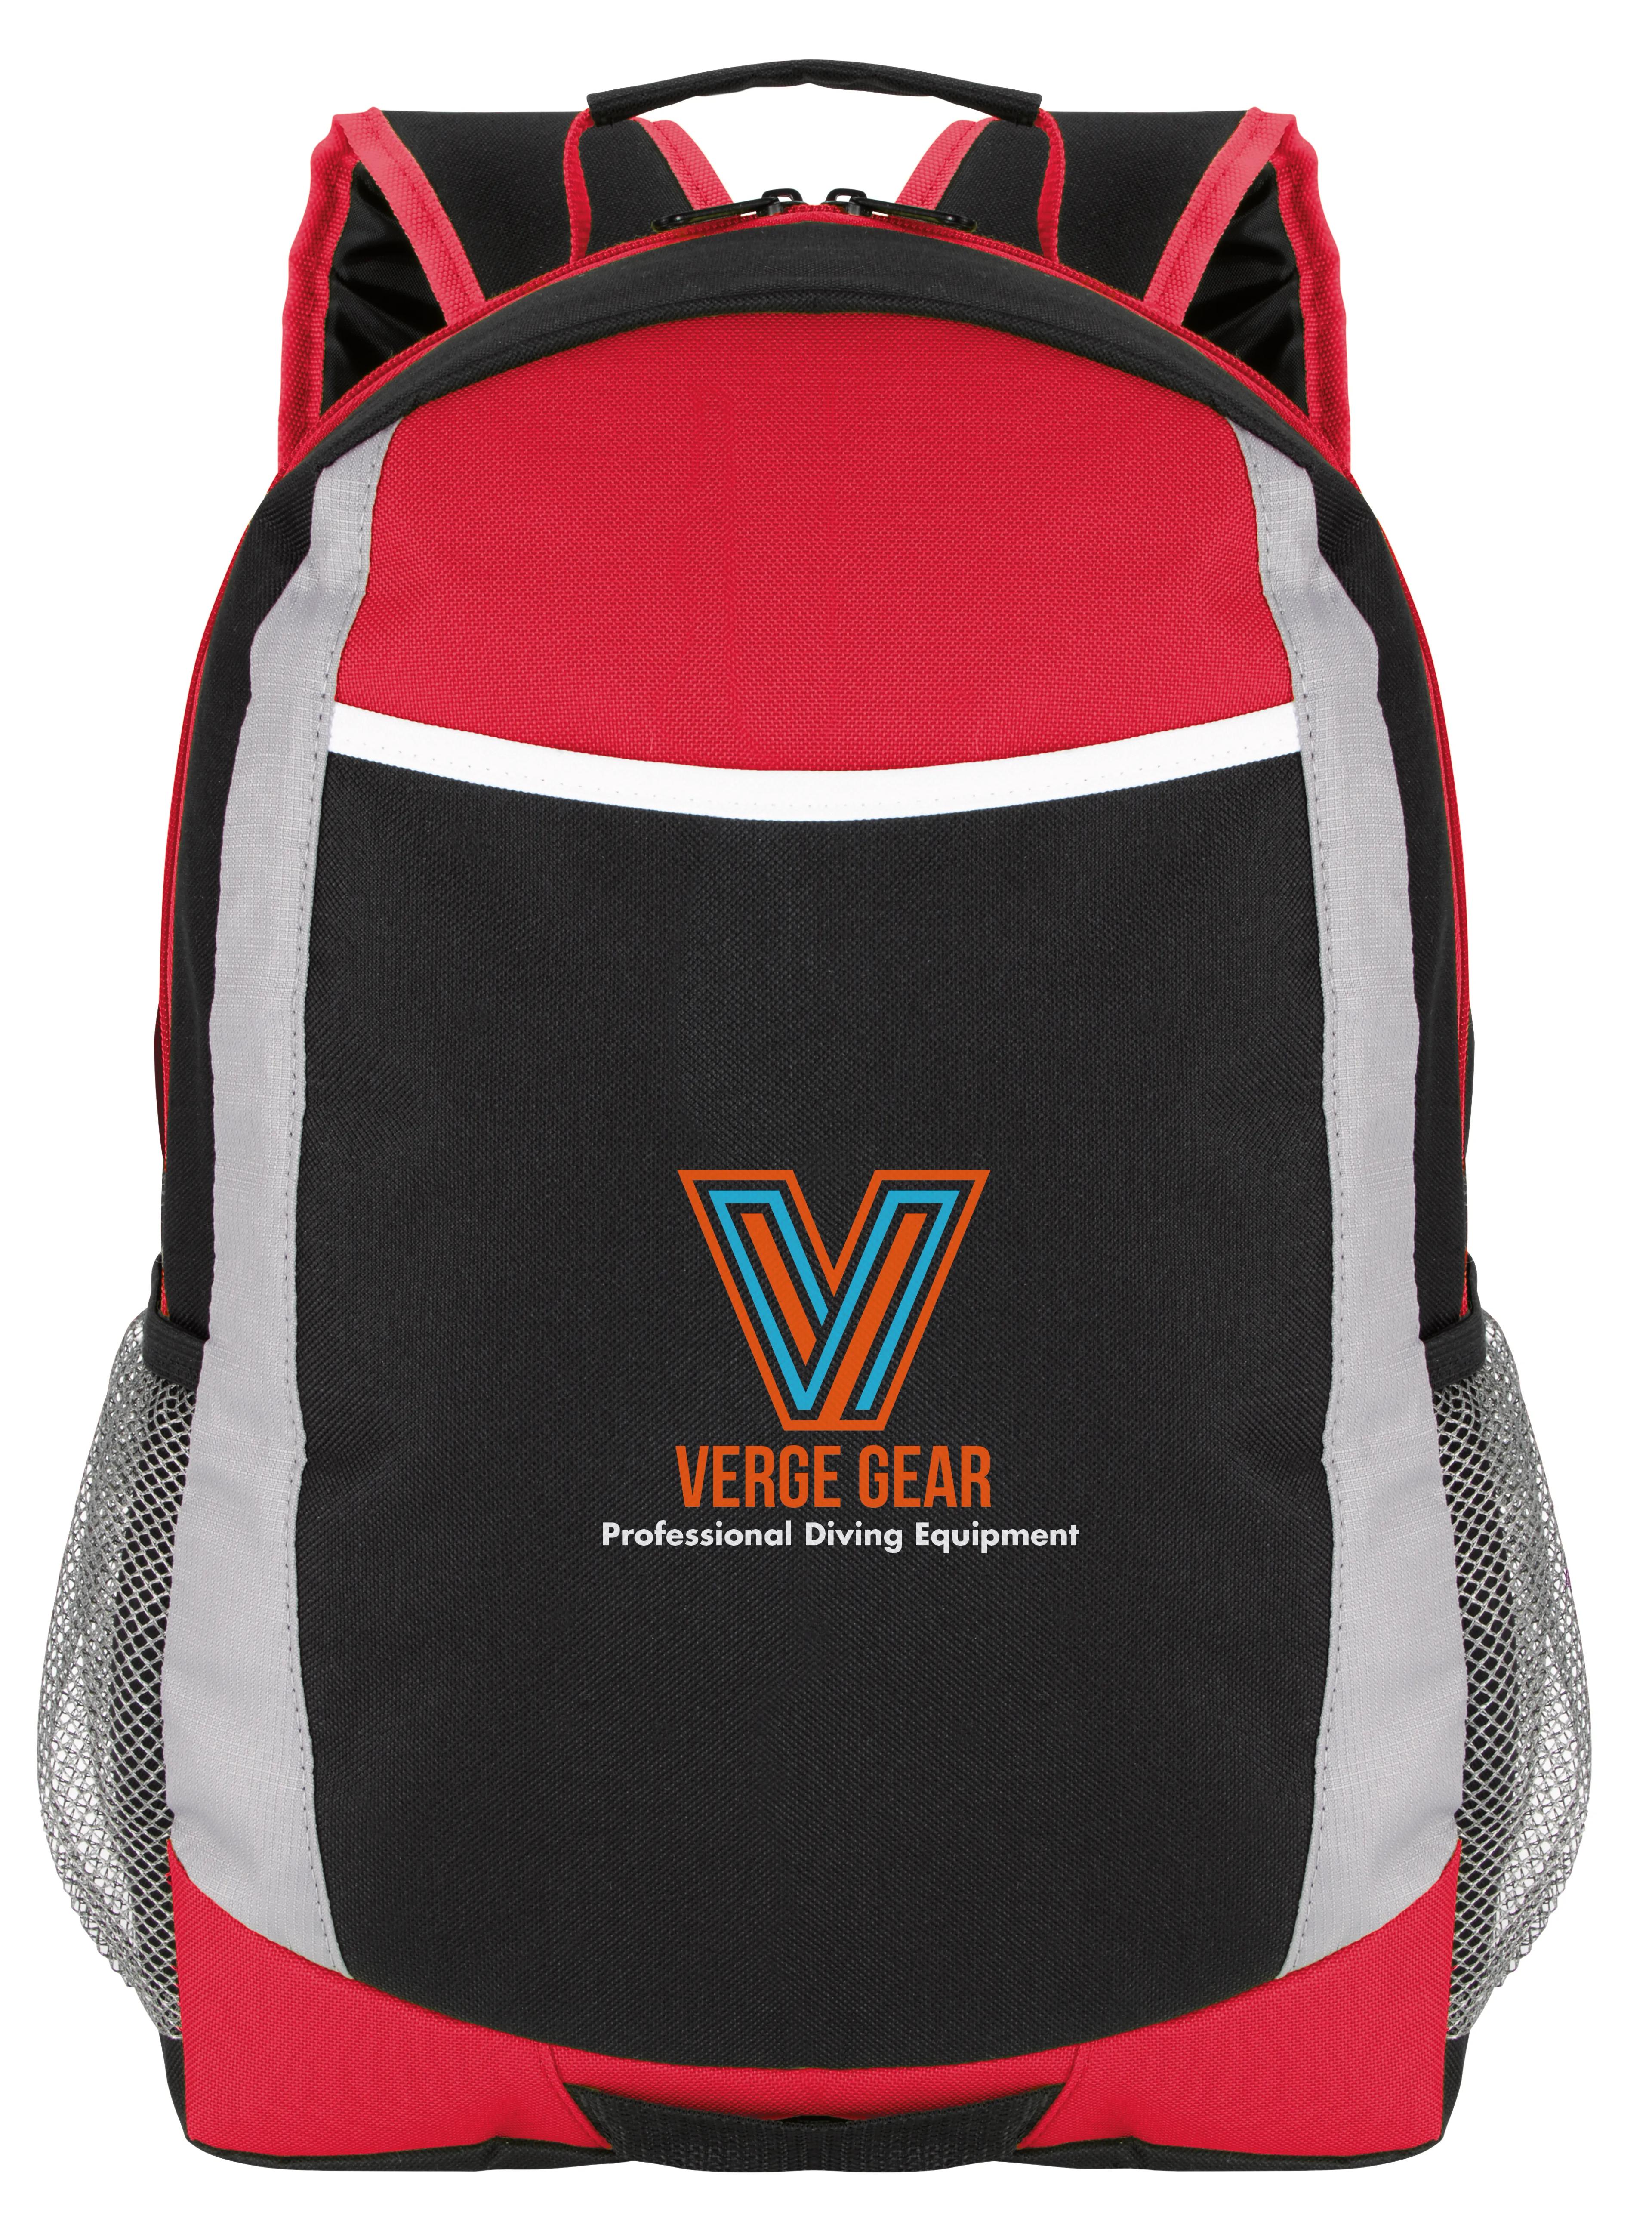 Primary Sport Backpack 12 of 14